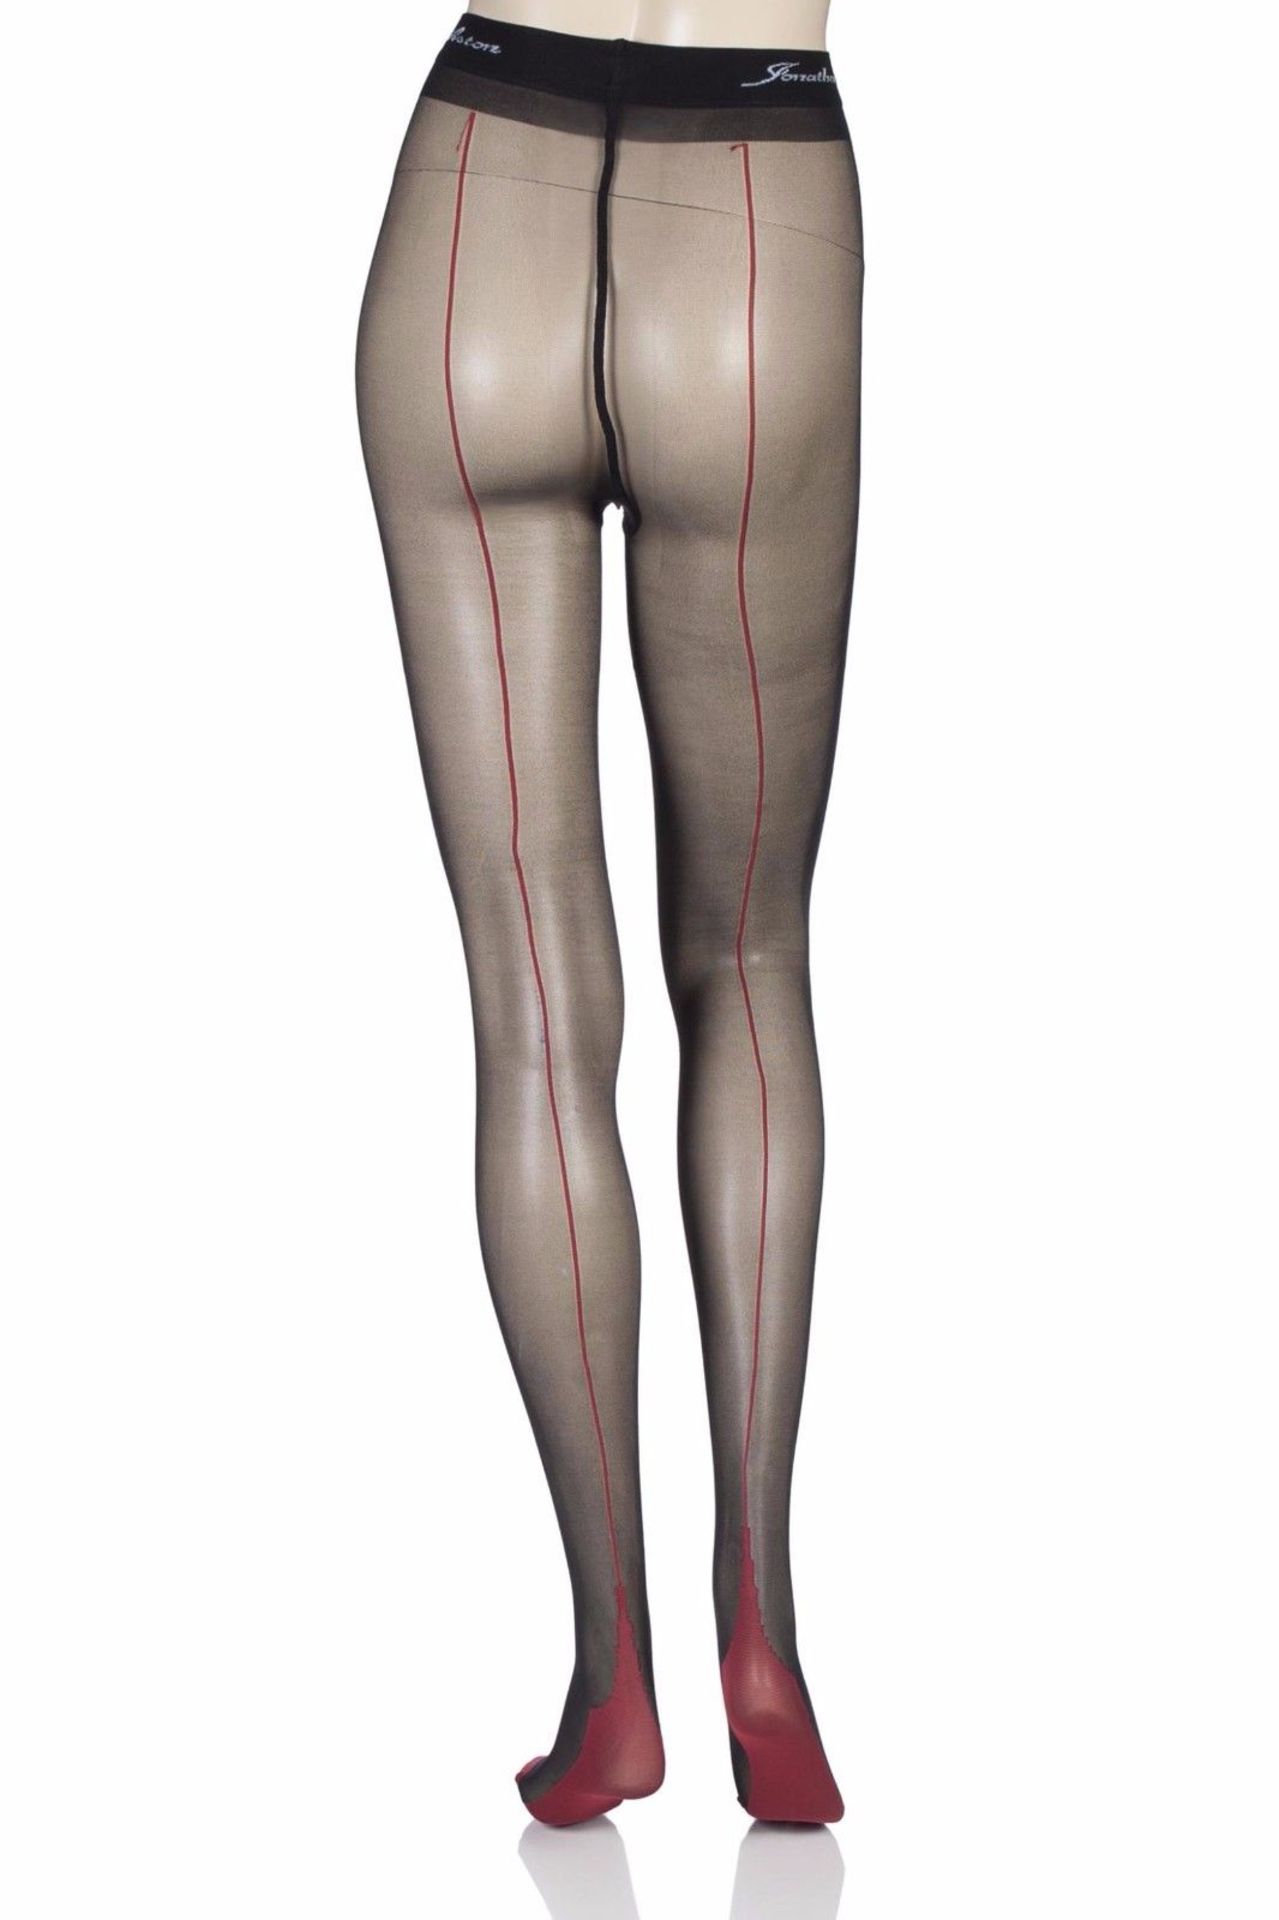 Jonathan Aston Vintage Legs Contrast Seam & Heel Tights, Black & Scarlet, Small (New with tags) [ - Image 2 of 3